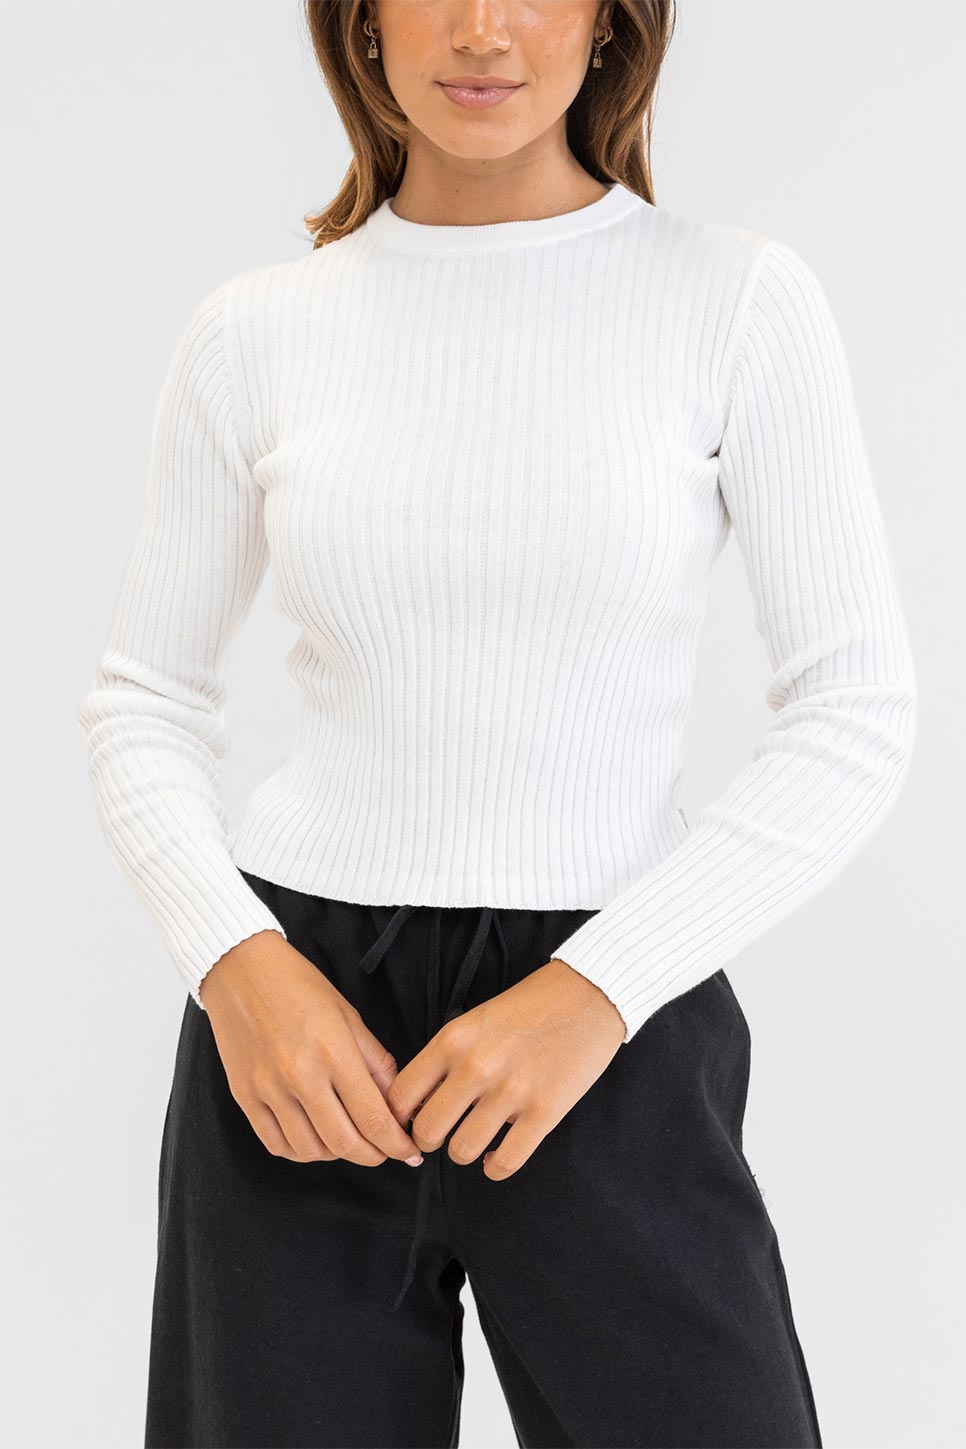 Rhythm - Classic Knit LS Top - White - Front